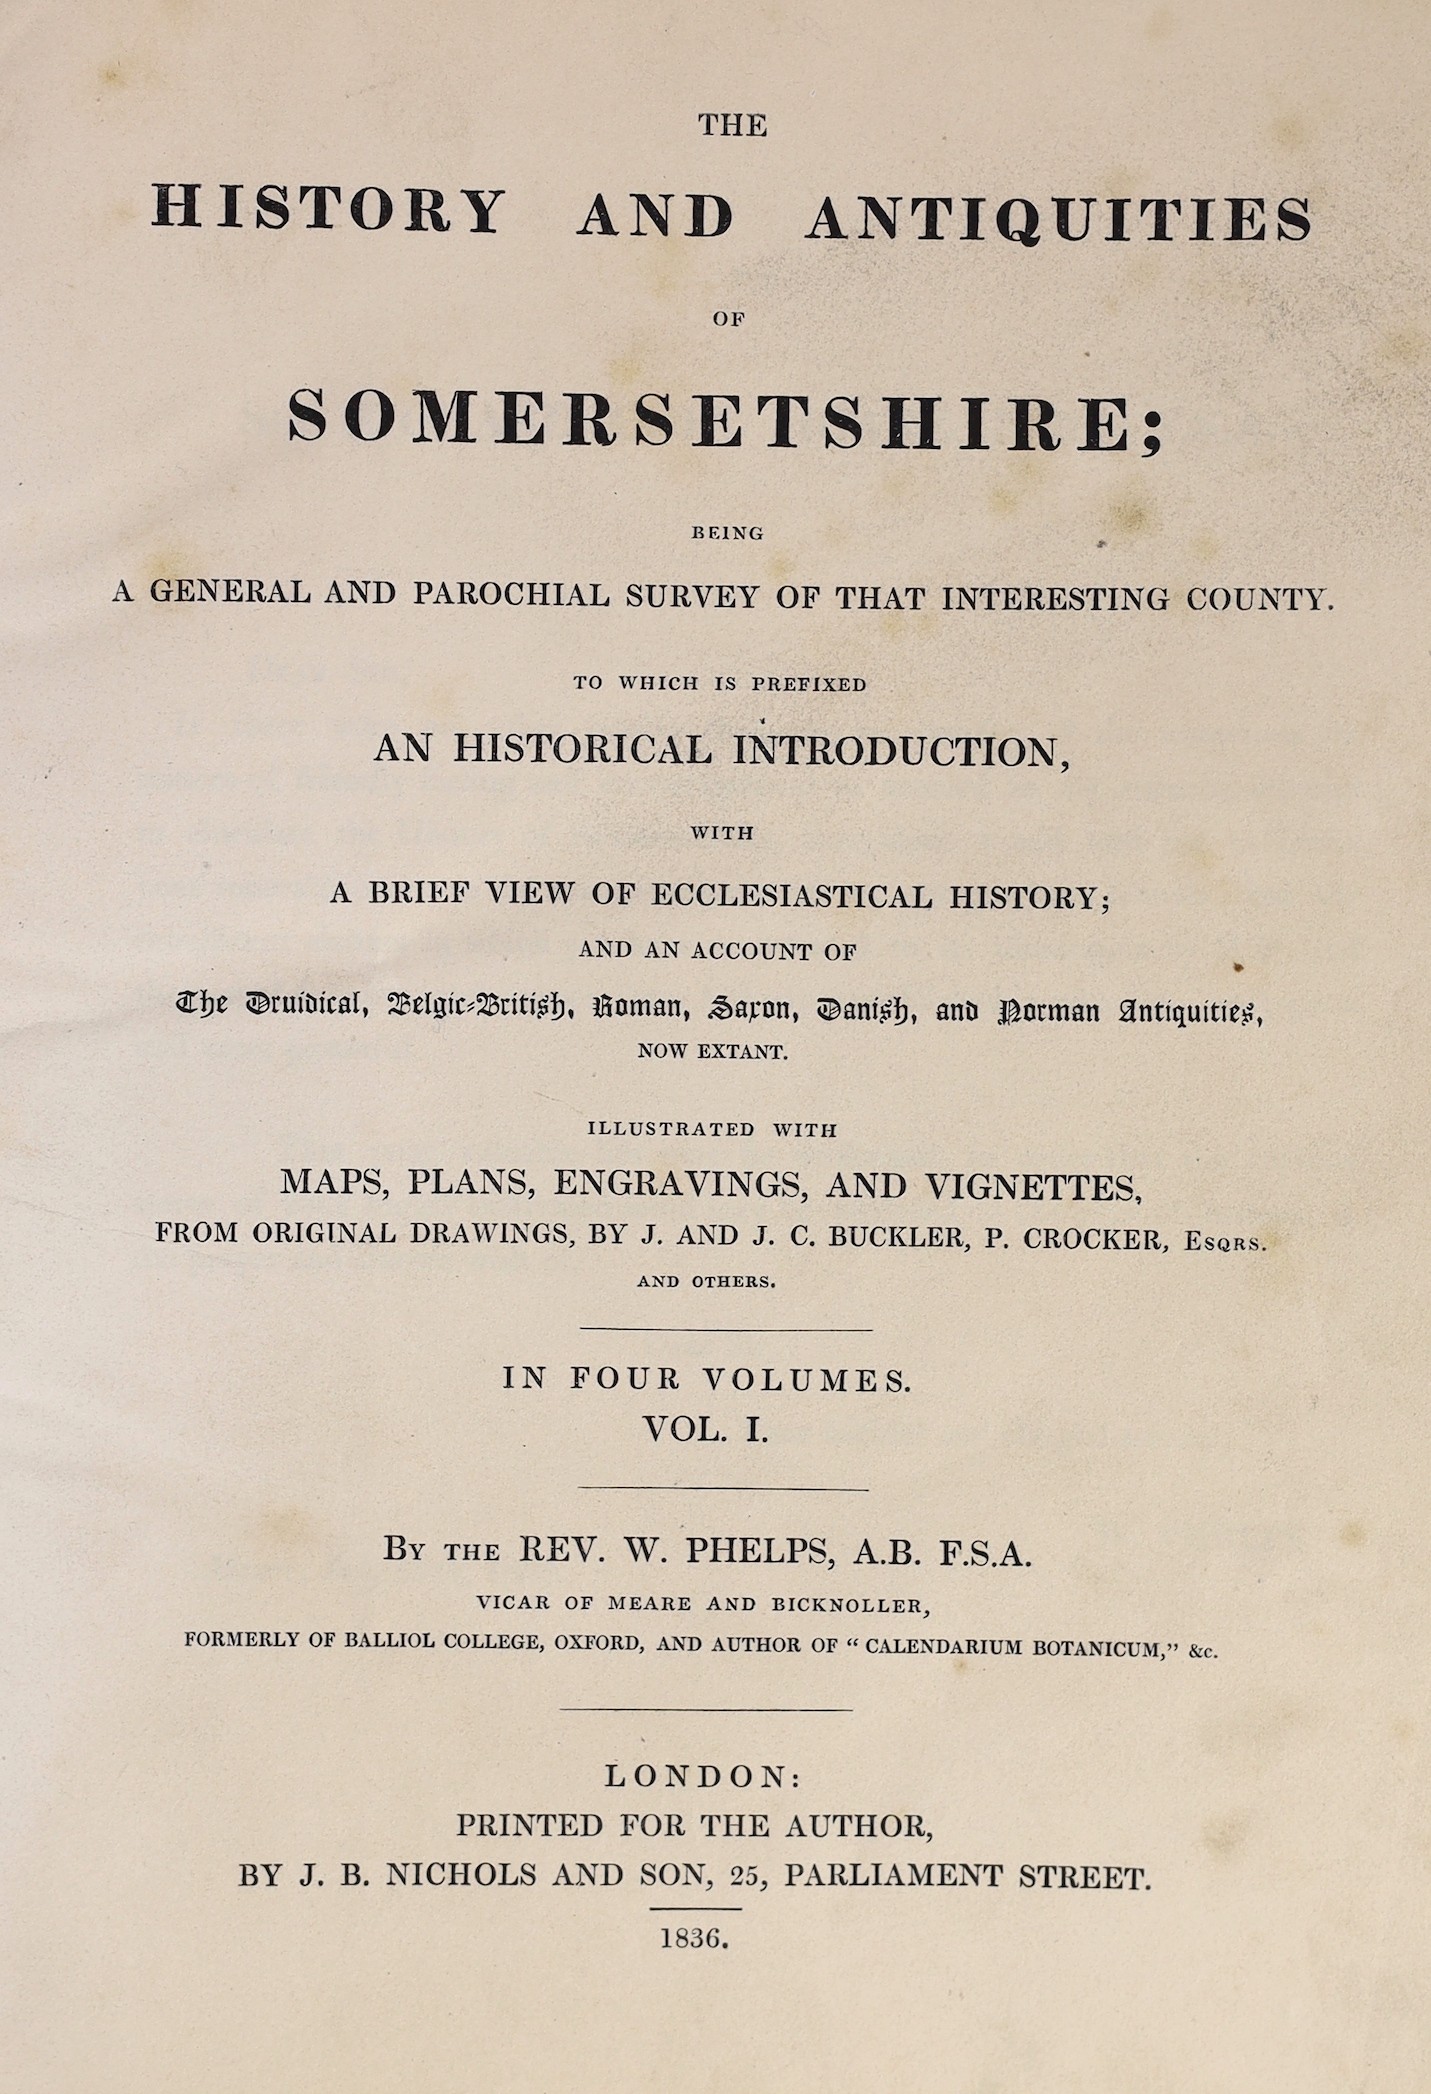 SOMERSET - Phelps, William, Rev. - The History and Antiquities of Somersetshire, 2 vols in 1, containing 8 parts, 4to, half morocco, with 6 maps and 44 plates, J.B. Nicholls, London, 1836                                 